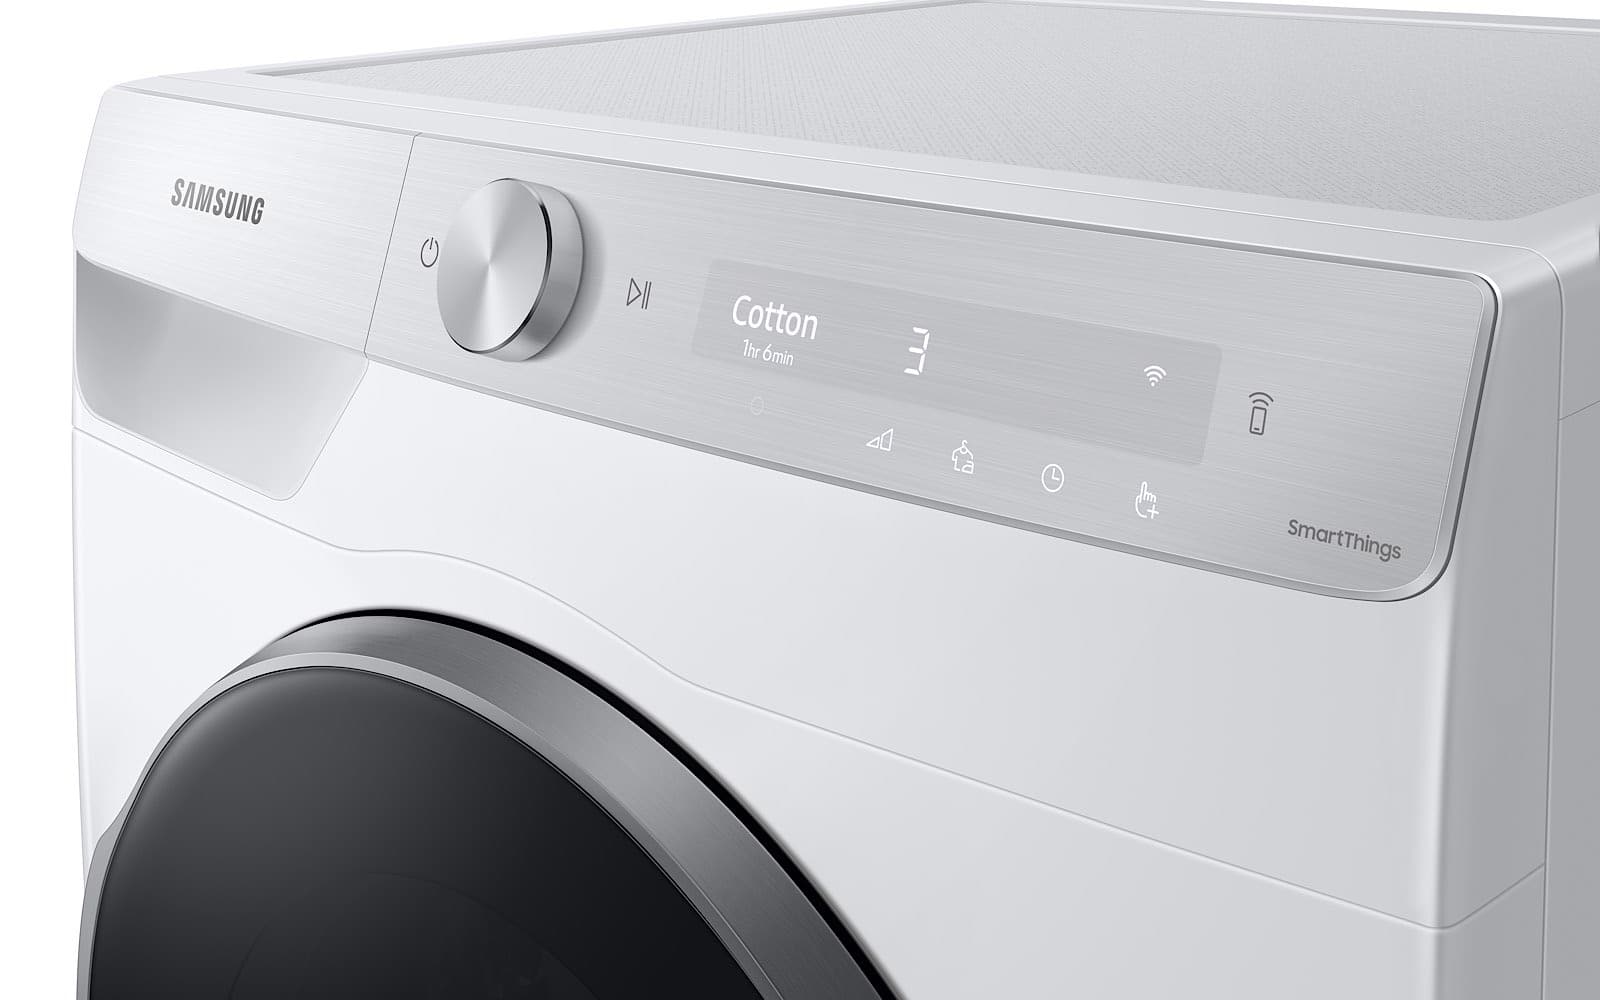 Samsung Simple UX laundry machines